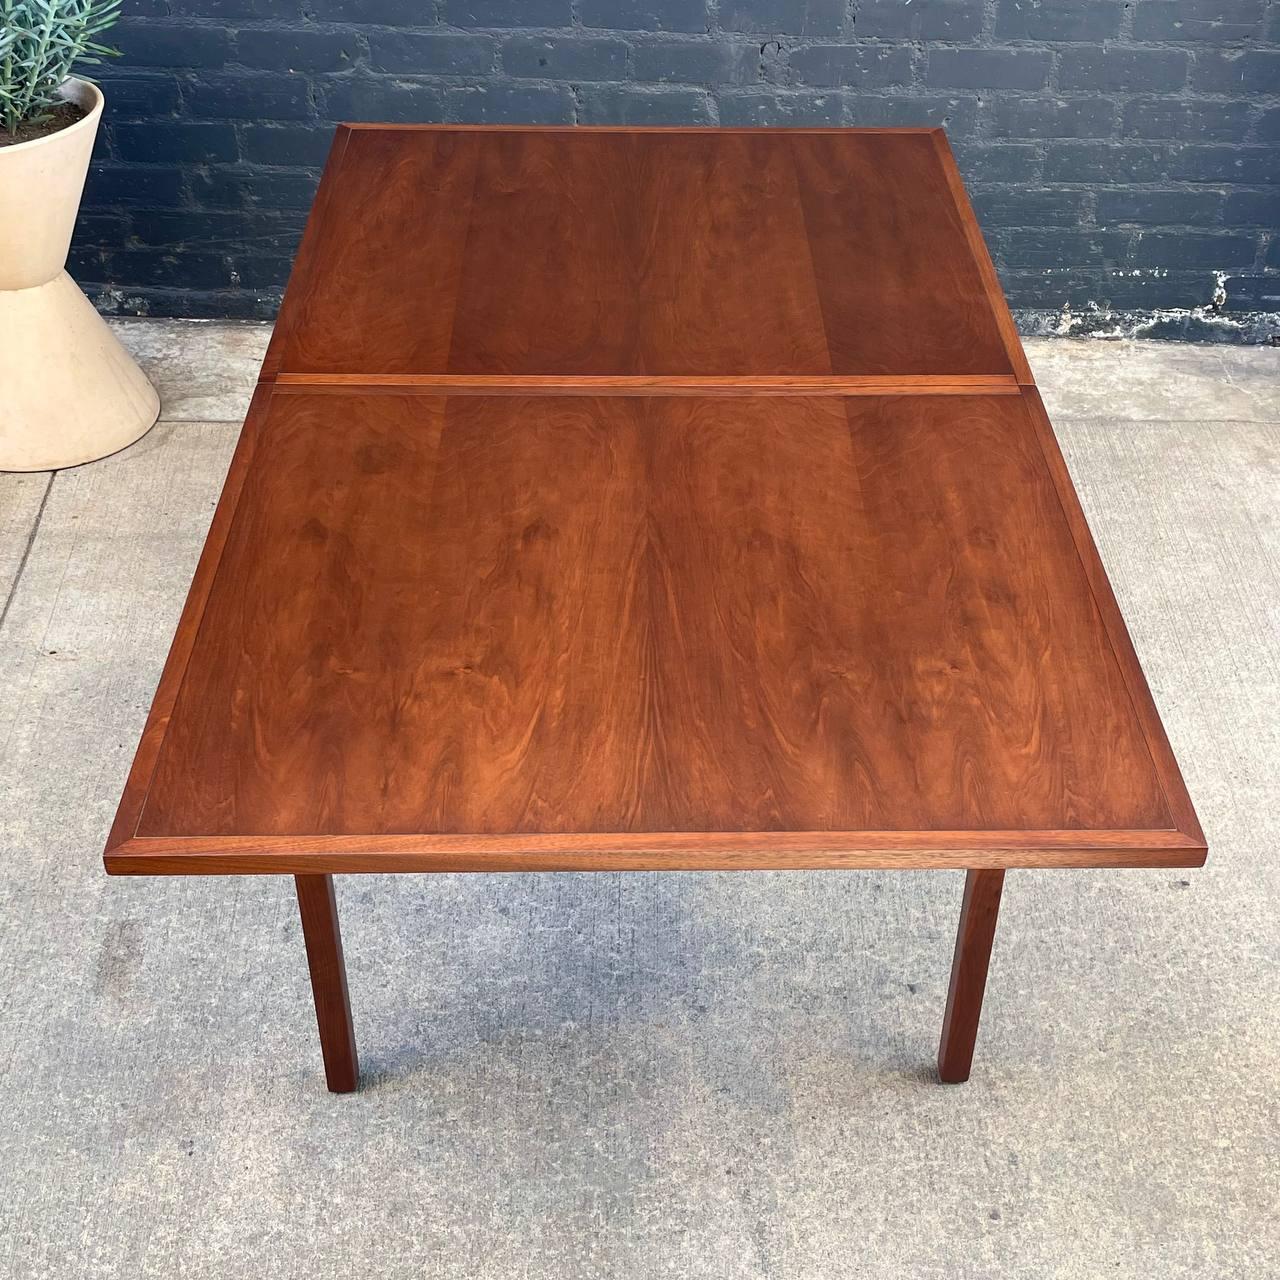 Newly Refinished Expanding Mid-Century Modern Walnut Dining Table, Milo Baughman 1